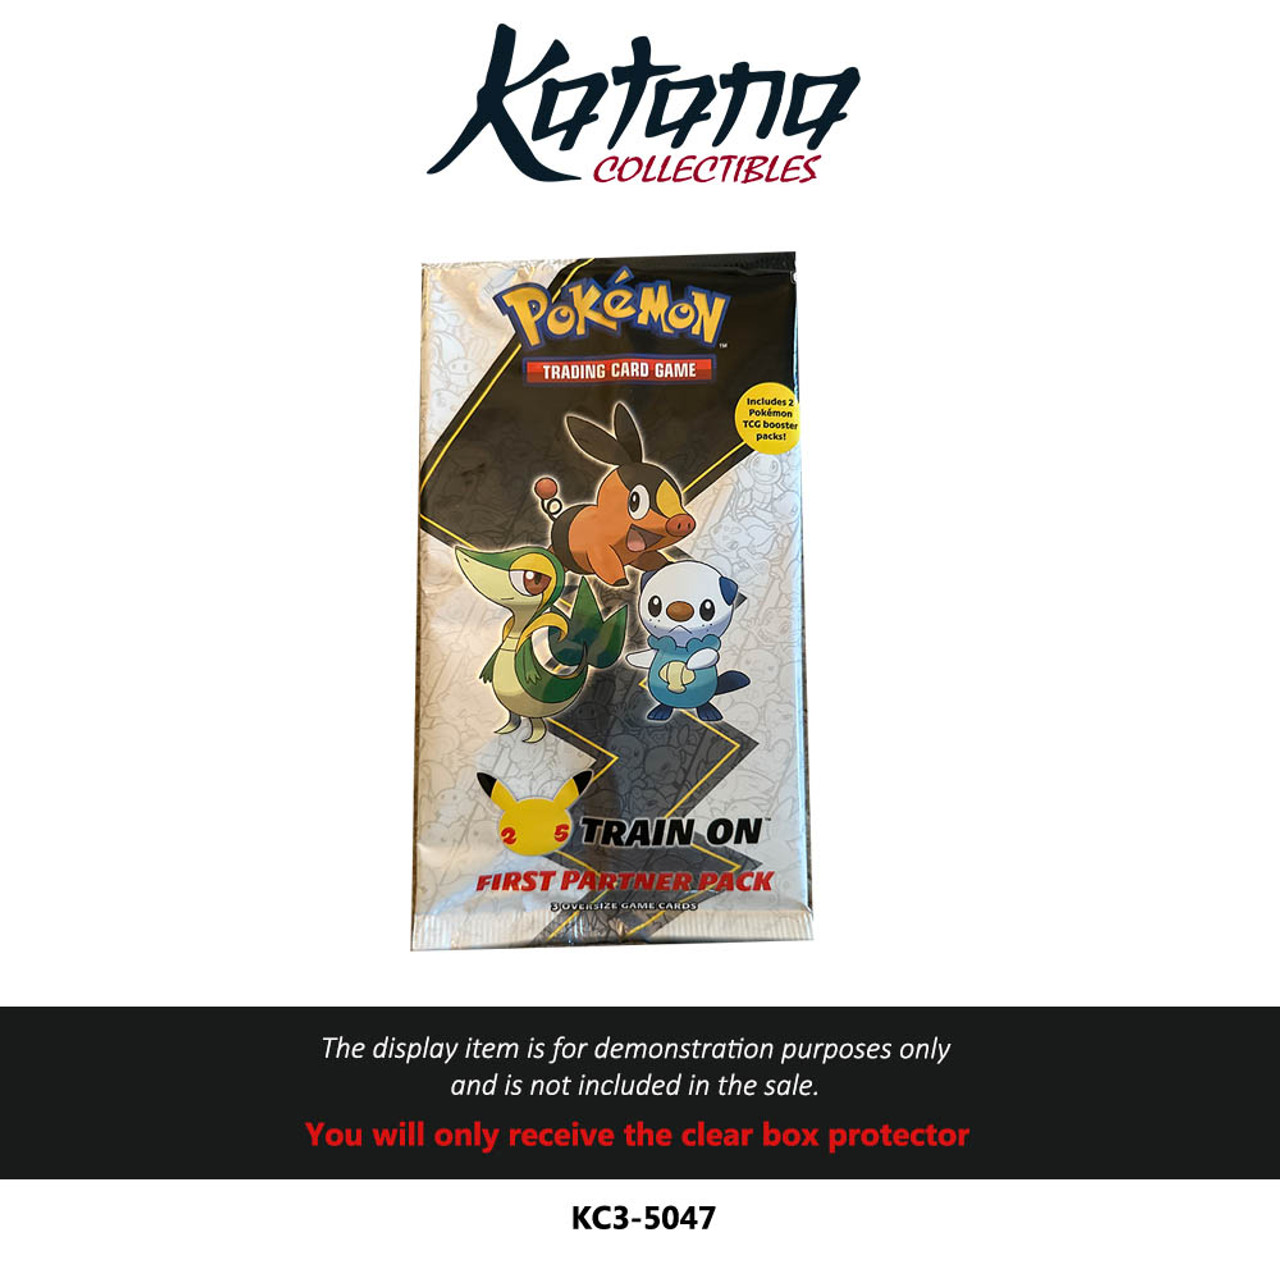 Katana Collectibles Protector For Pokémon First Partner Pack